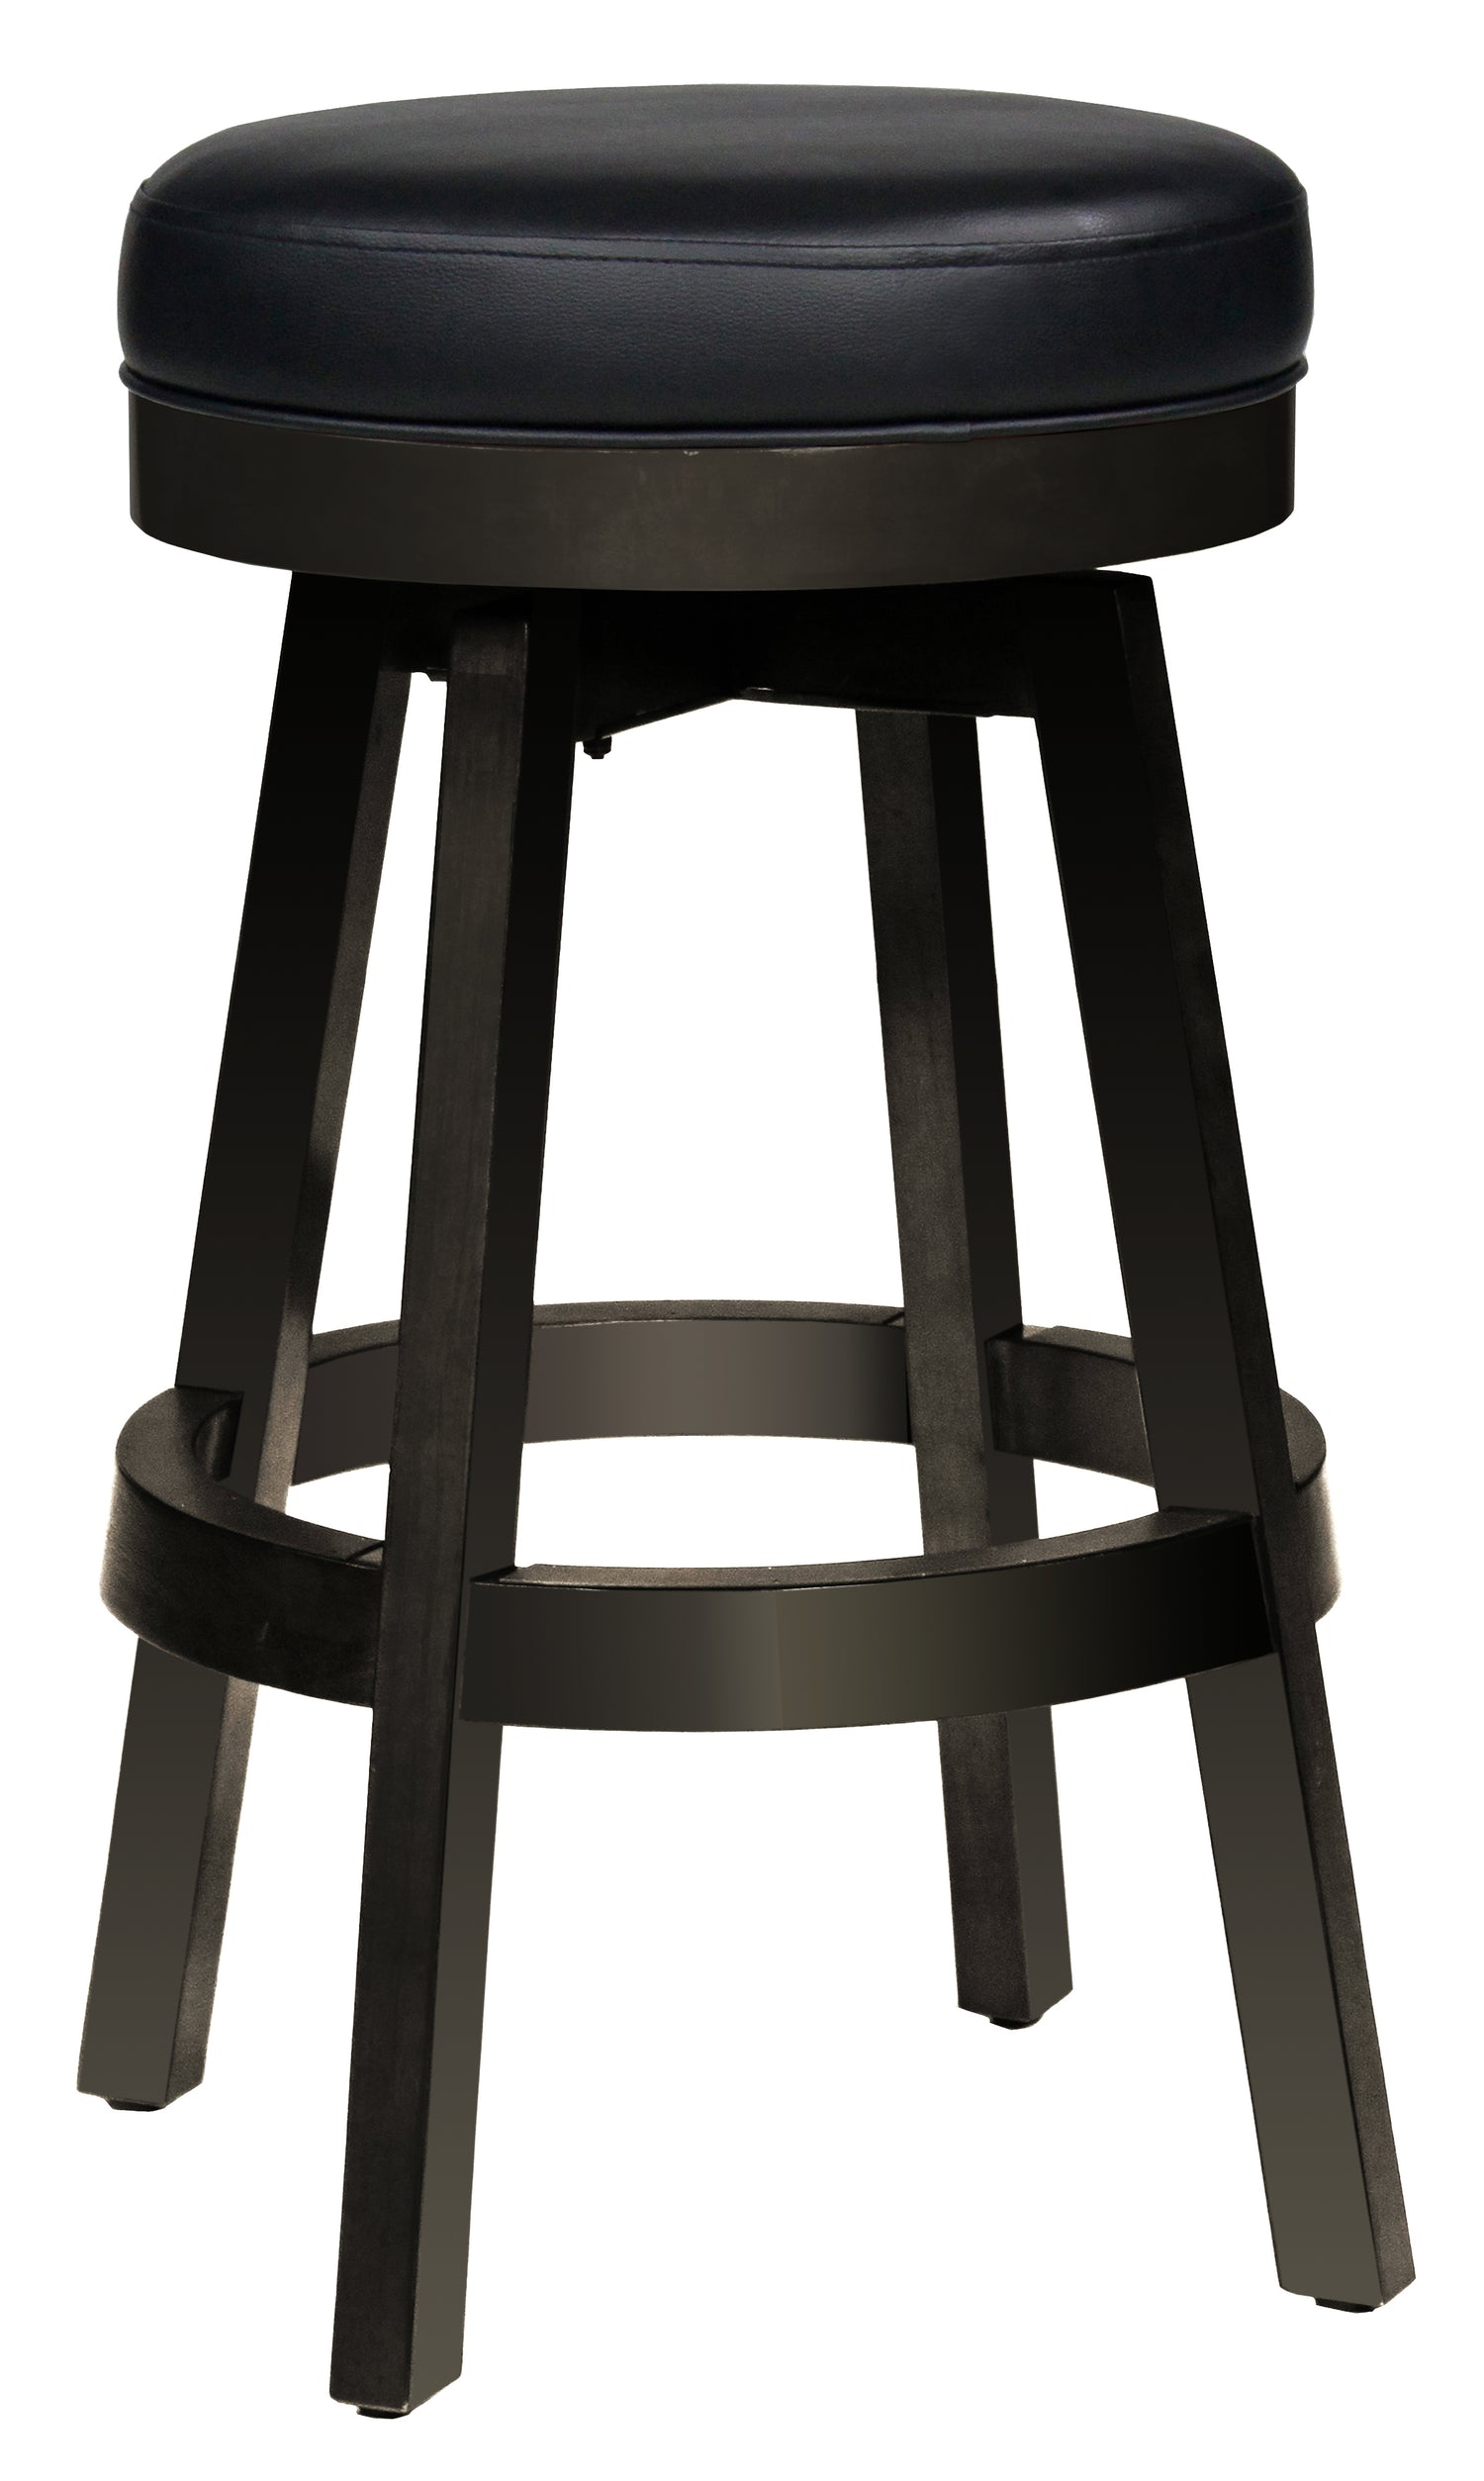 Legacy Billiards Classic Backless Barstool in Raven Finish